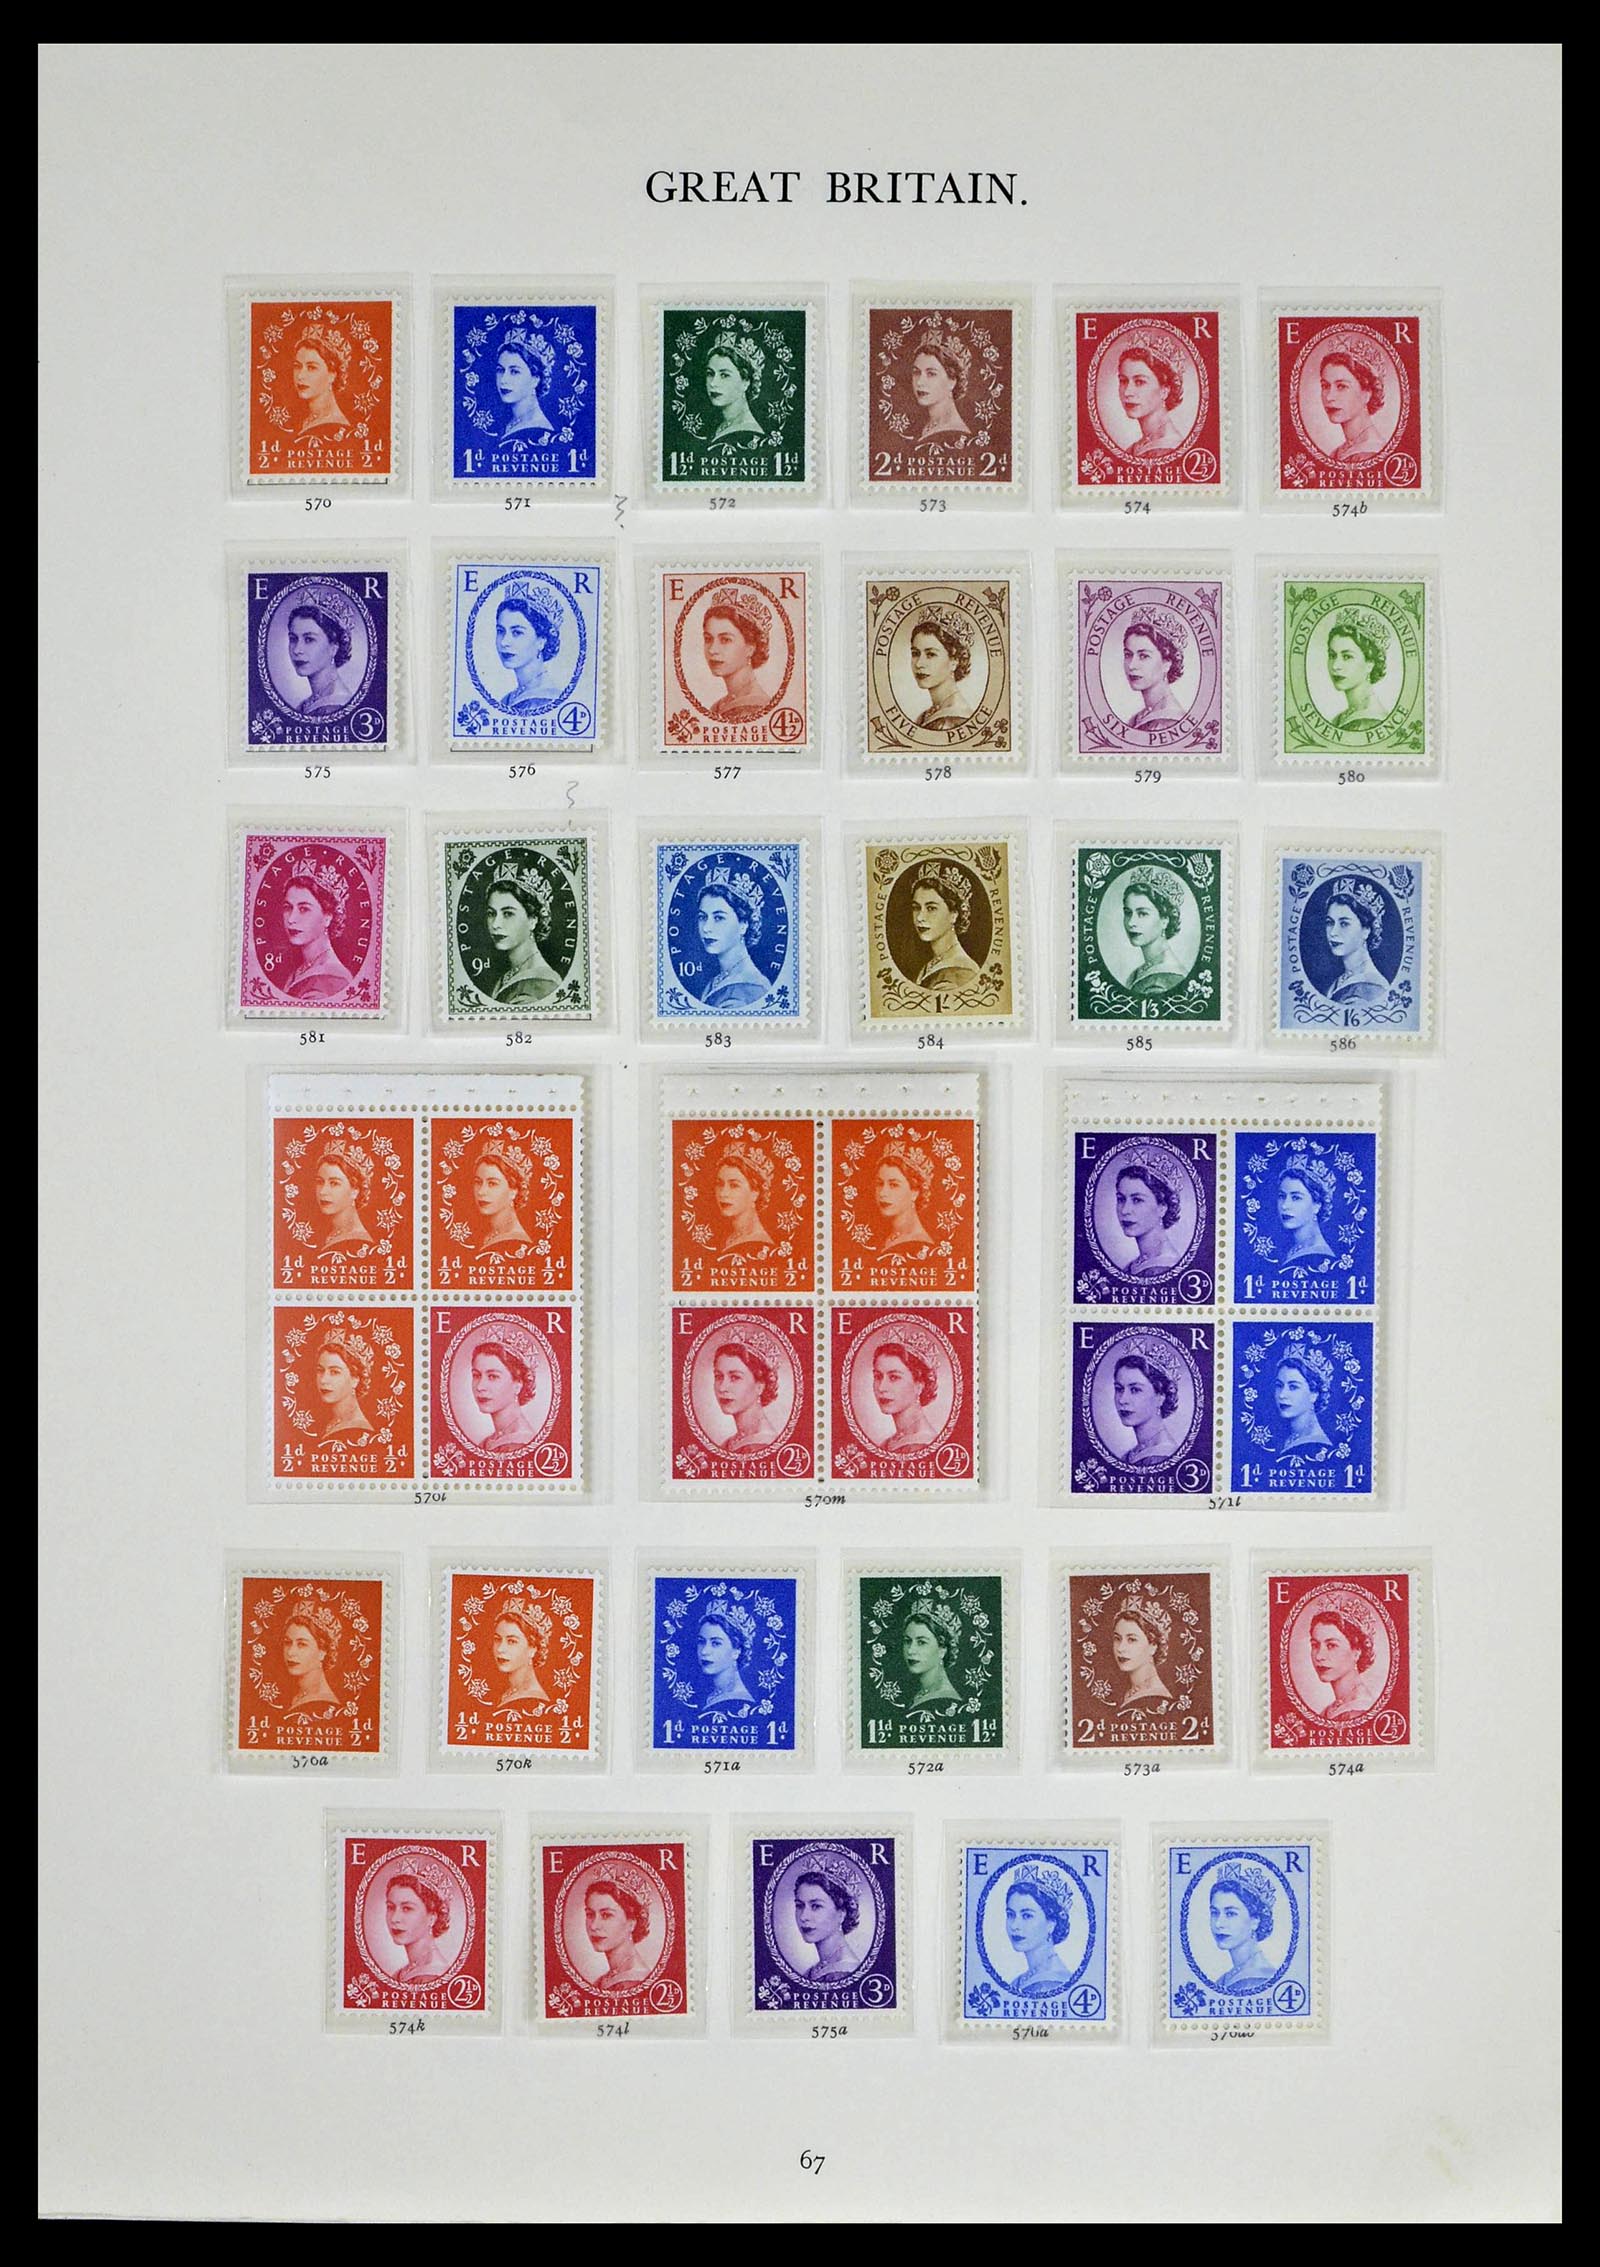 39025 0030 - Stamp collection 39025 Great Britain specialised 1840-1990.